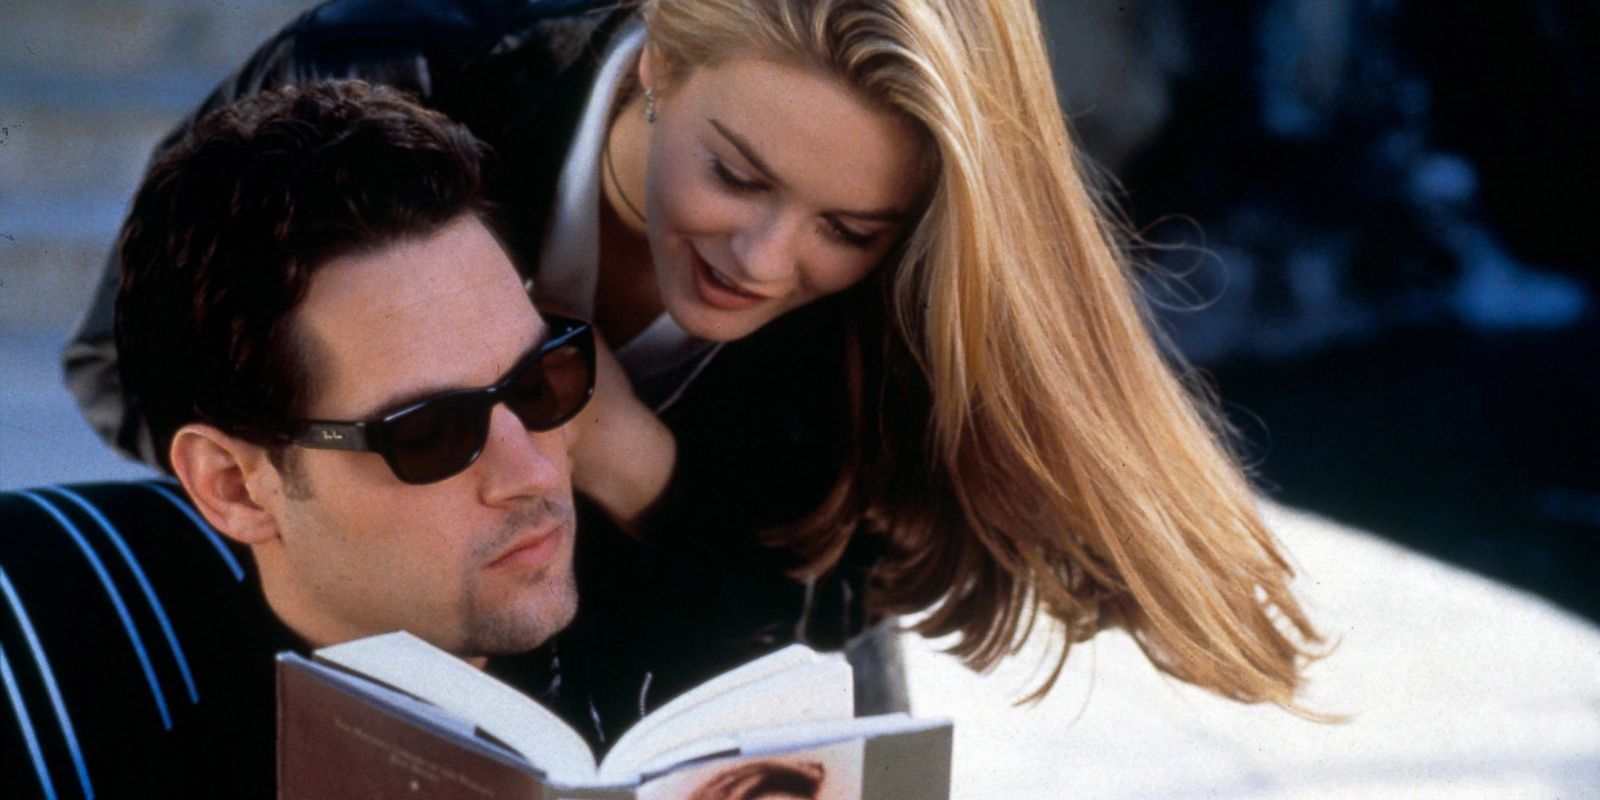 Cher reads Josh's book over his shoulder in Clueless